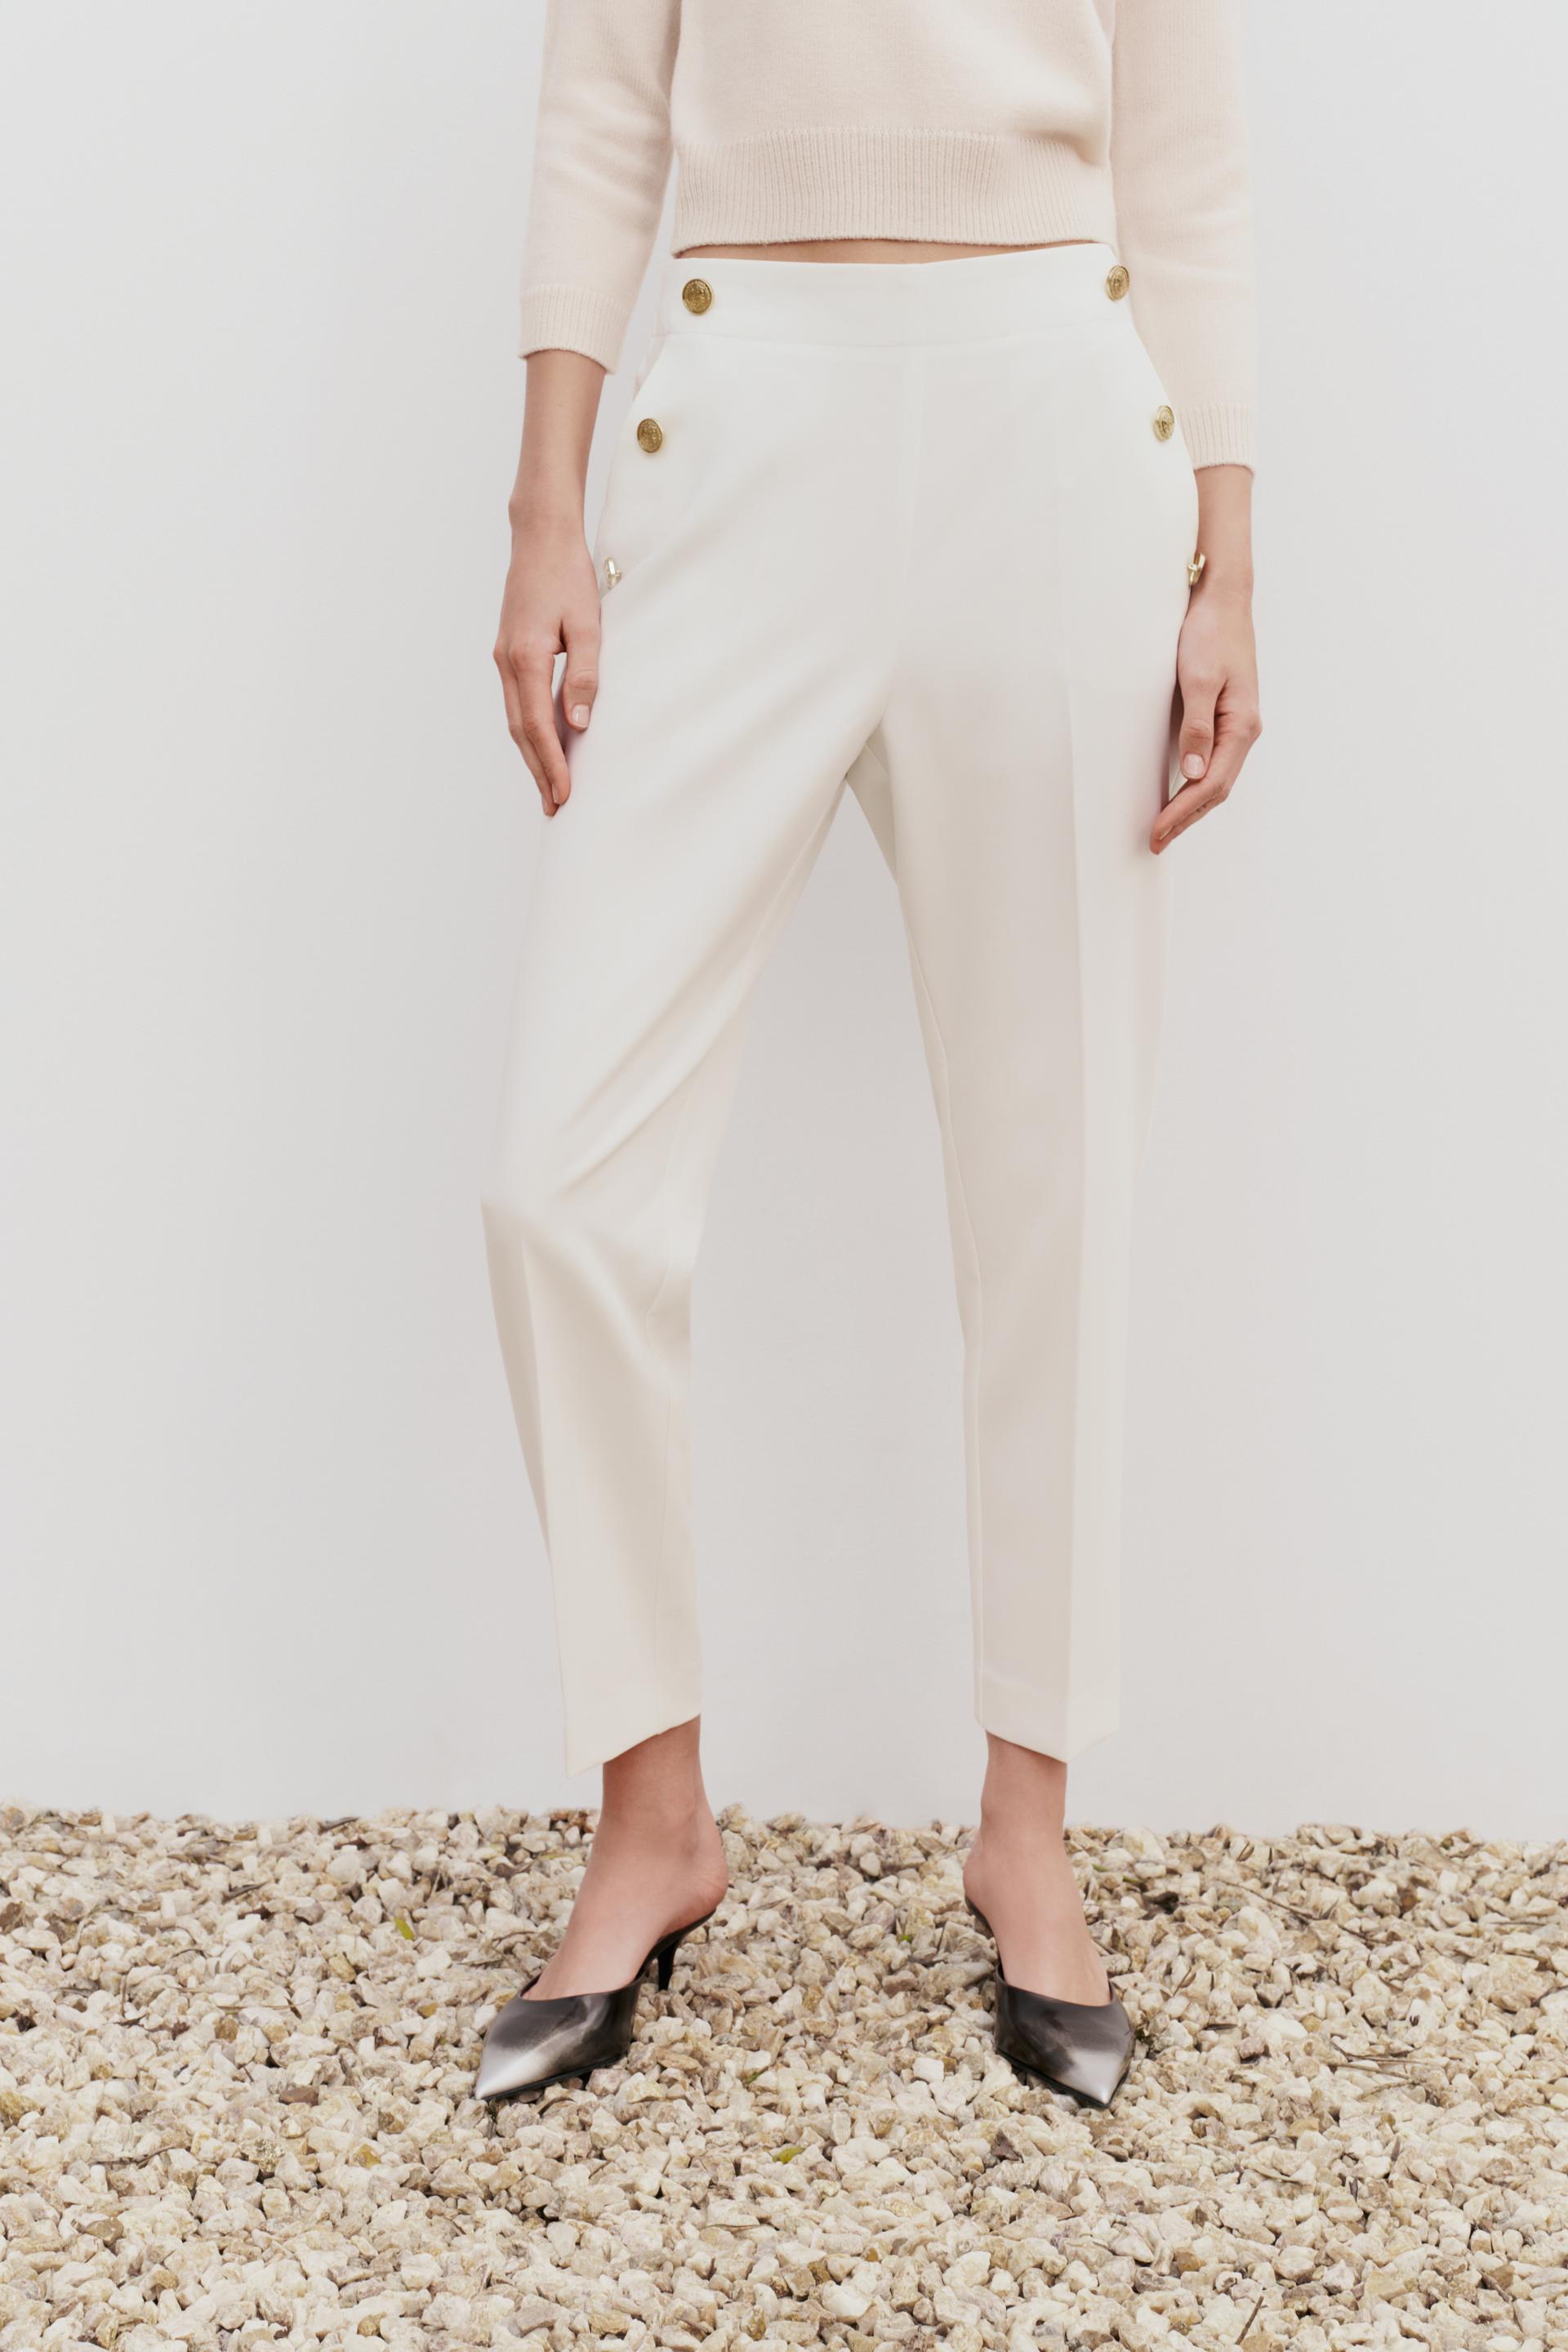 ZARA Embroidered Linen High Waist Straight Pants Trousers S-L NWT 2731/046  